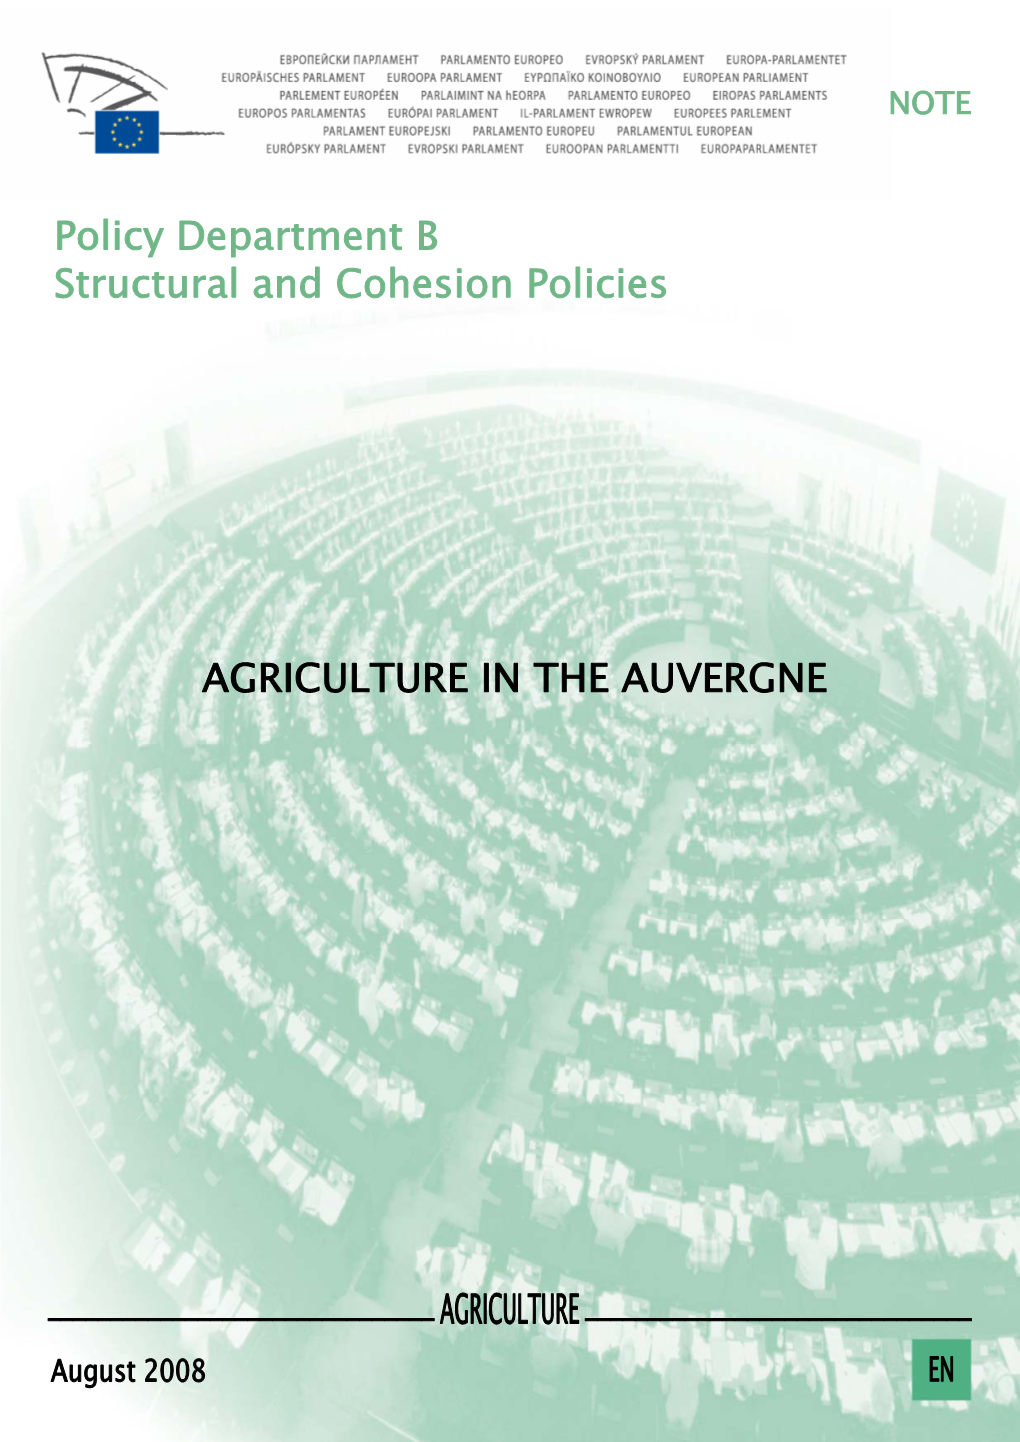 Policy Department B Structural and Cohesion Policies AGRICULTURE in the AUVERGNE